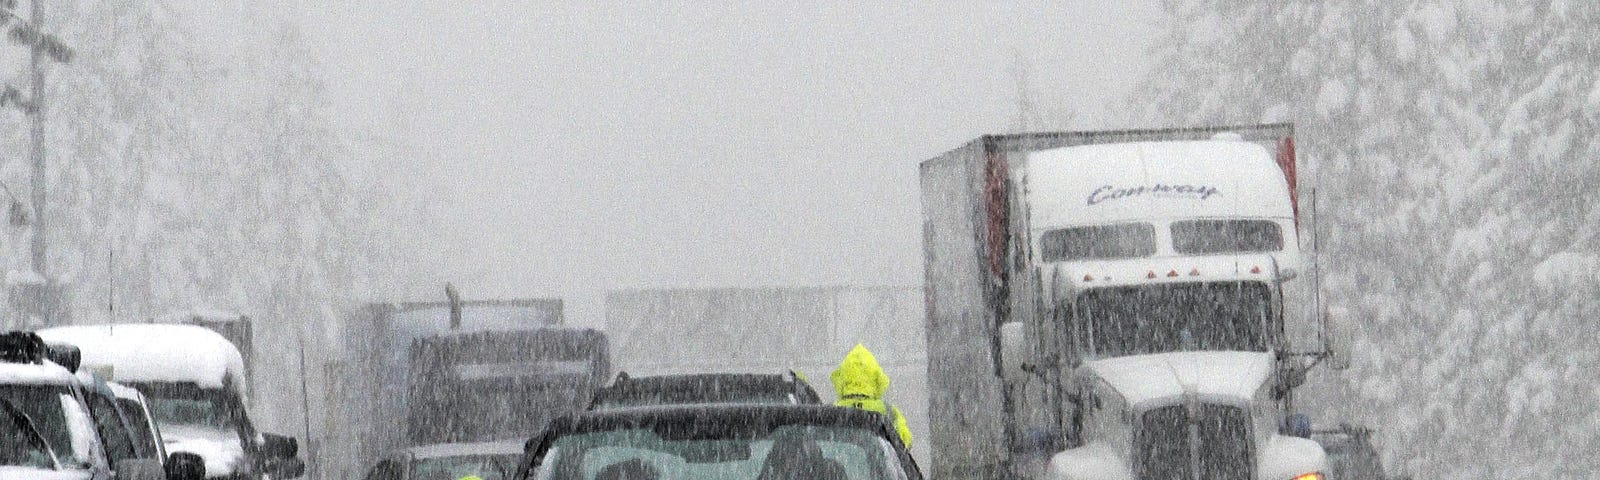 A person is kneeling in the middle of the road during a snowstorm to look at the tires of the car. There are skid marks and heavy traffic surrounding the car.